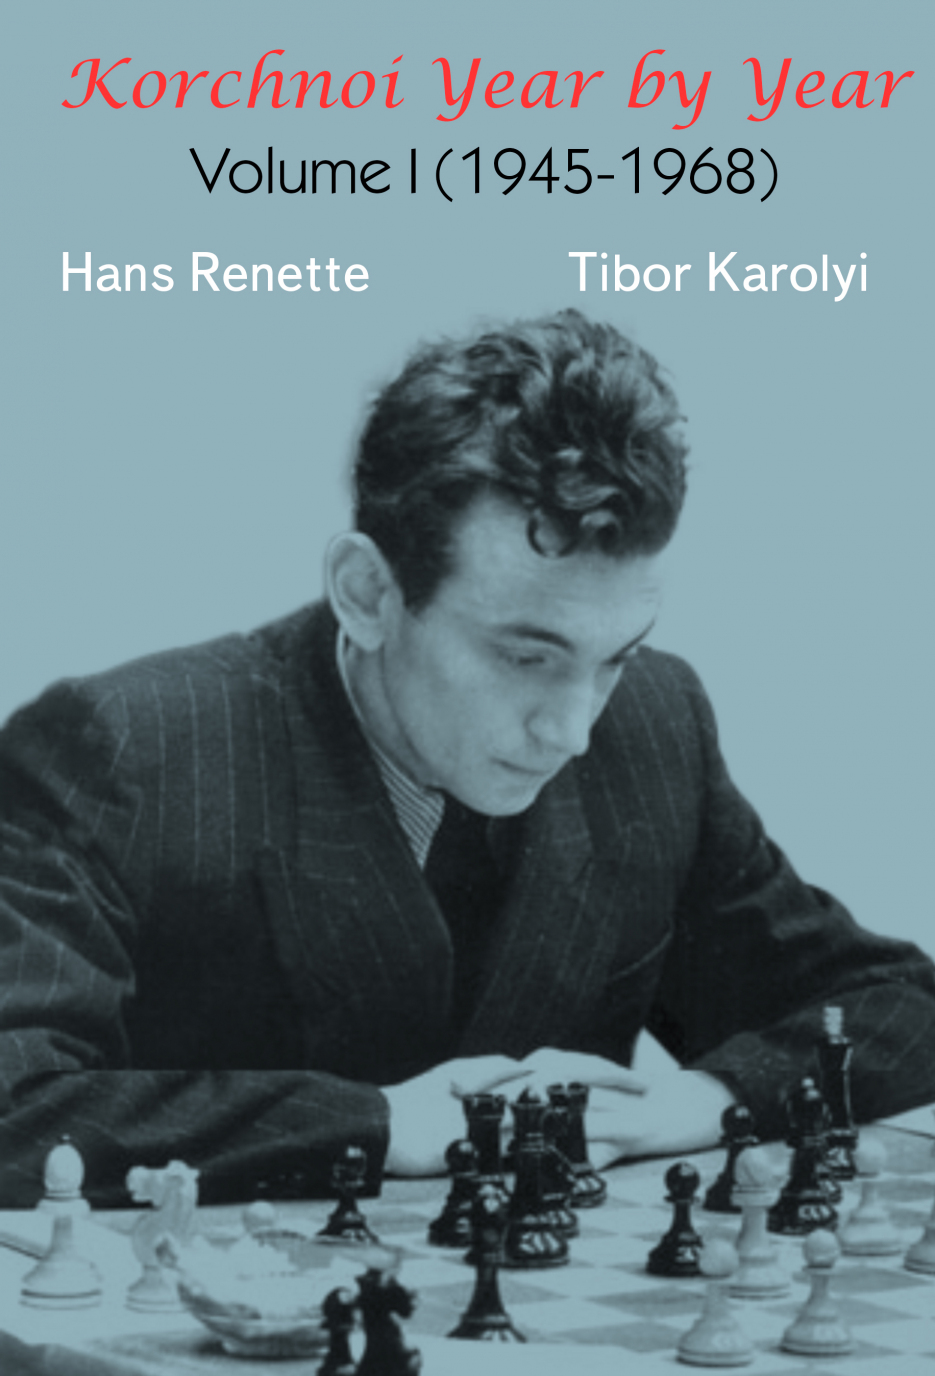 Tactics Helping Strategy - Learn from Spassky and Petrosian (4h and 30 min  Running Time)